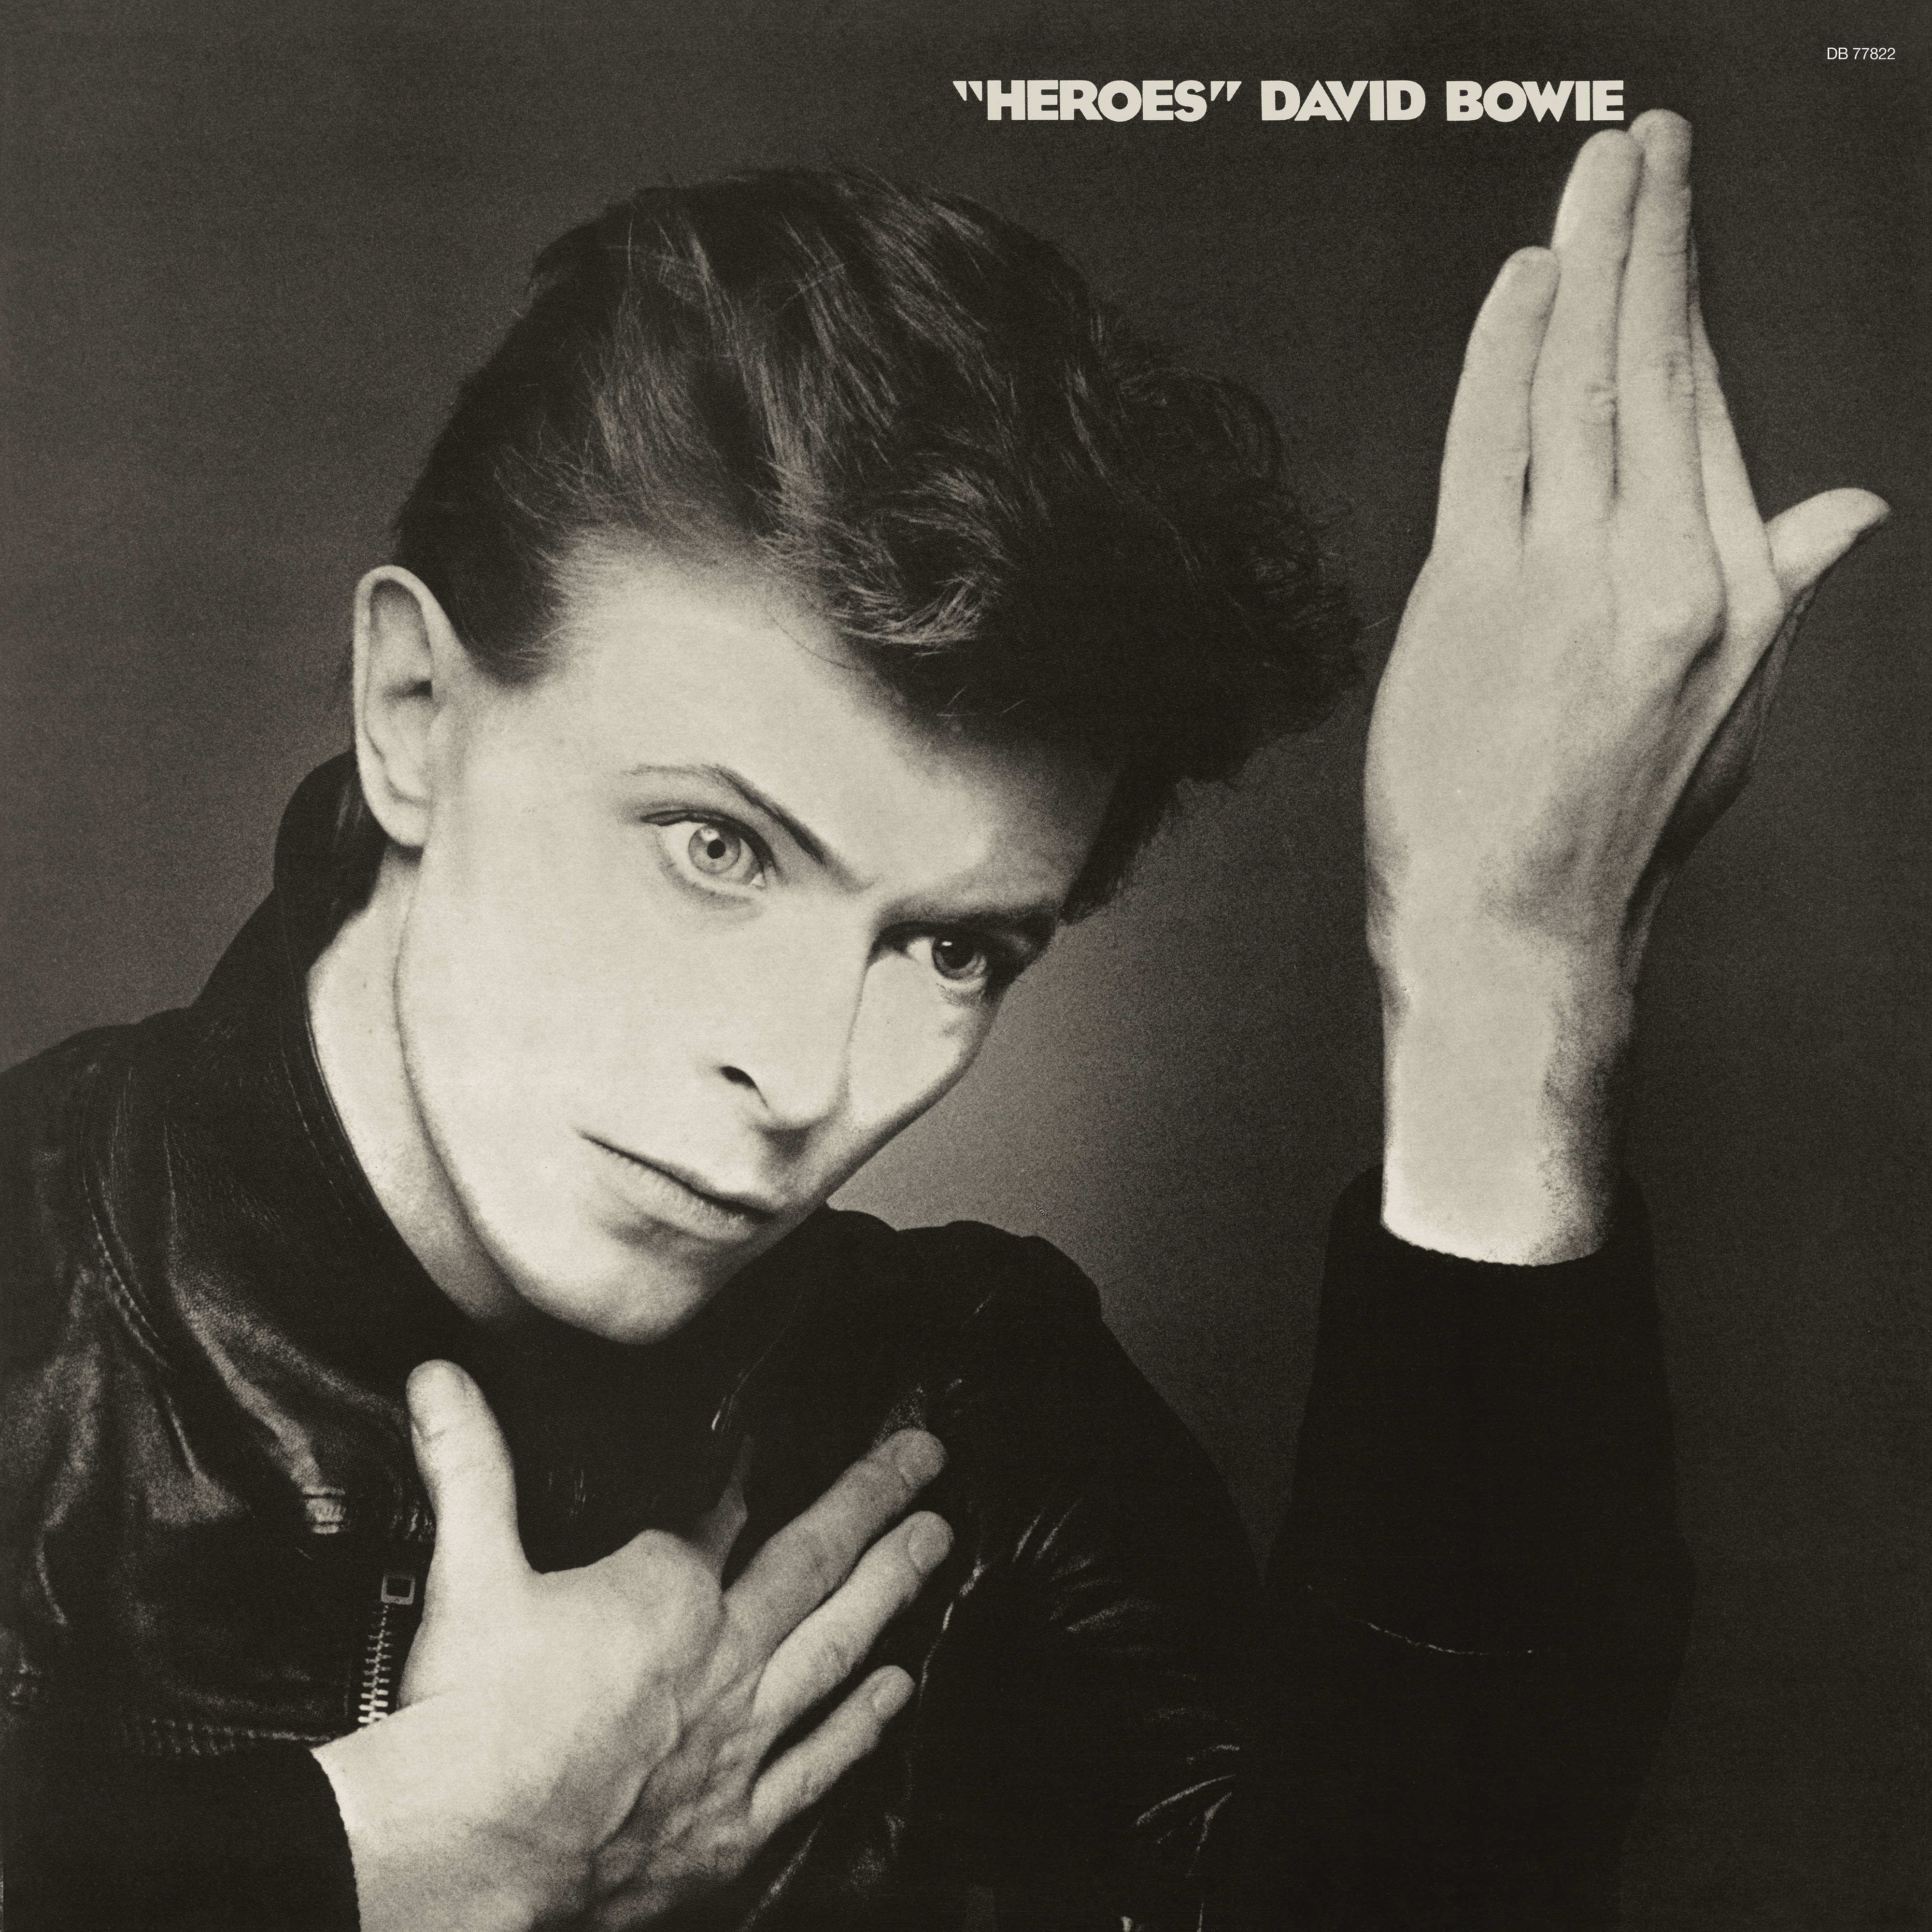 David Bowie - Heroes [40th Anniversary Limited Edition 7 Inch